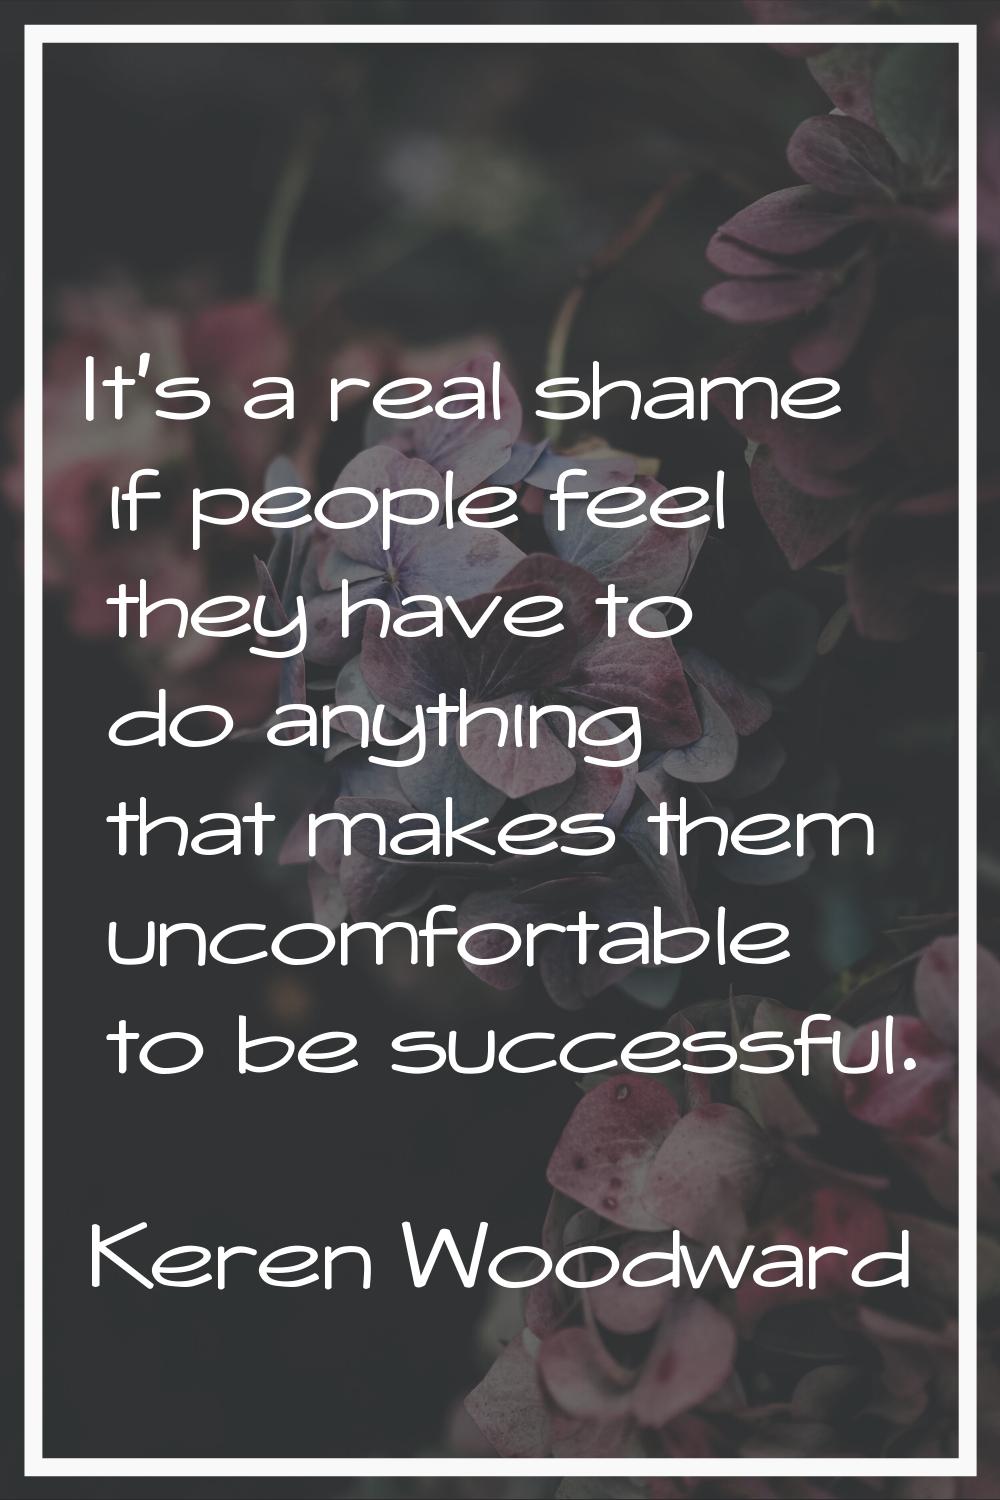 It's a real shame if people feel they have to do anything that makes them uncomfortable to be succe